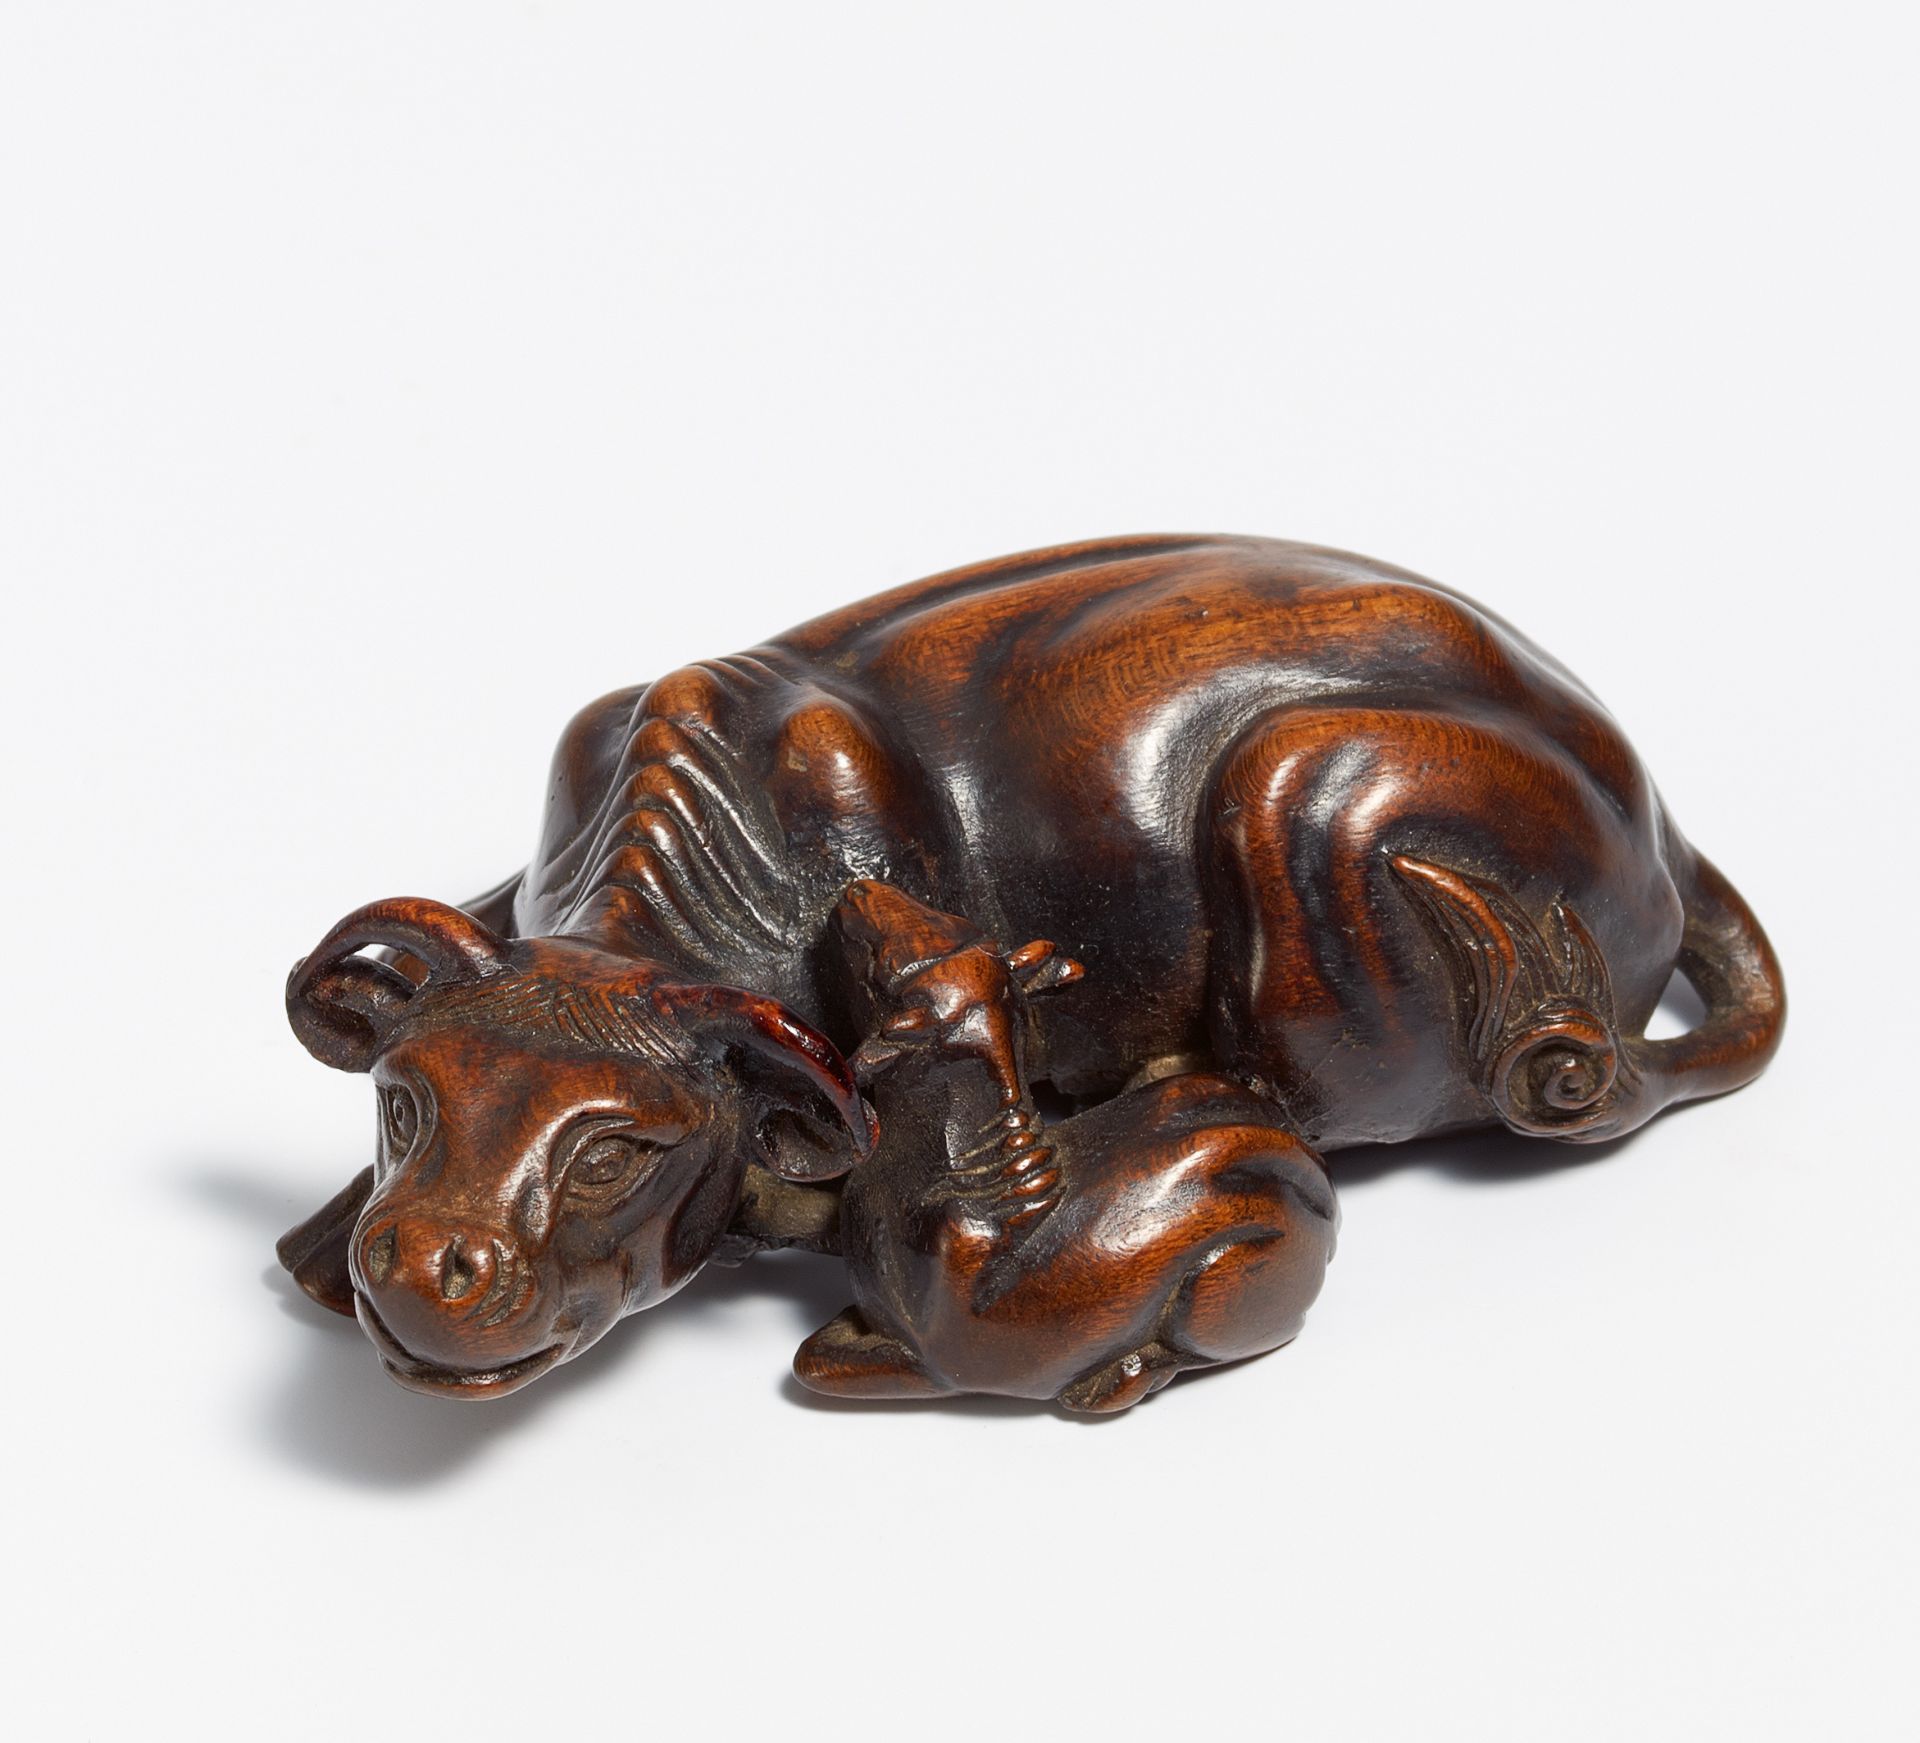 NETSUKE: RECUMBENT COW WITH CALF. Japan. 1st h. 19th c. Wood probably shitan, carved and polished.